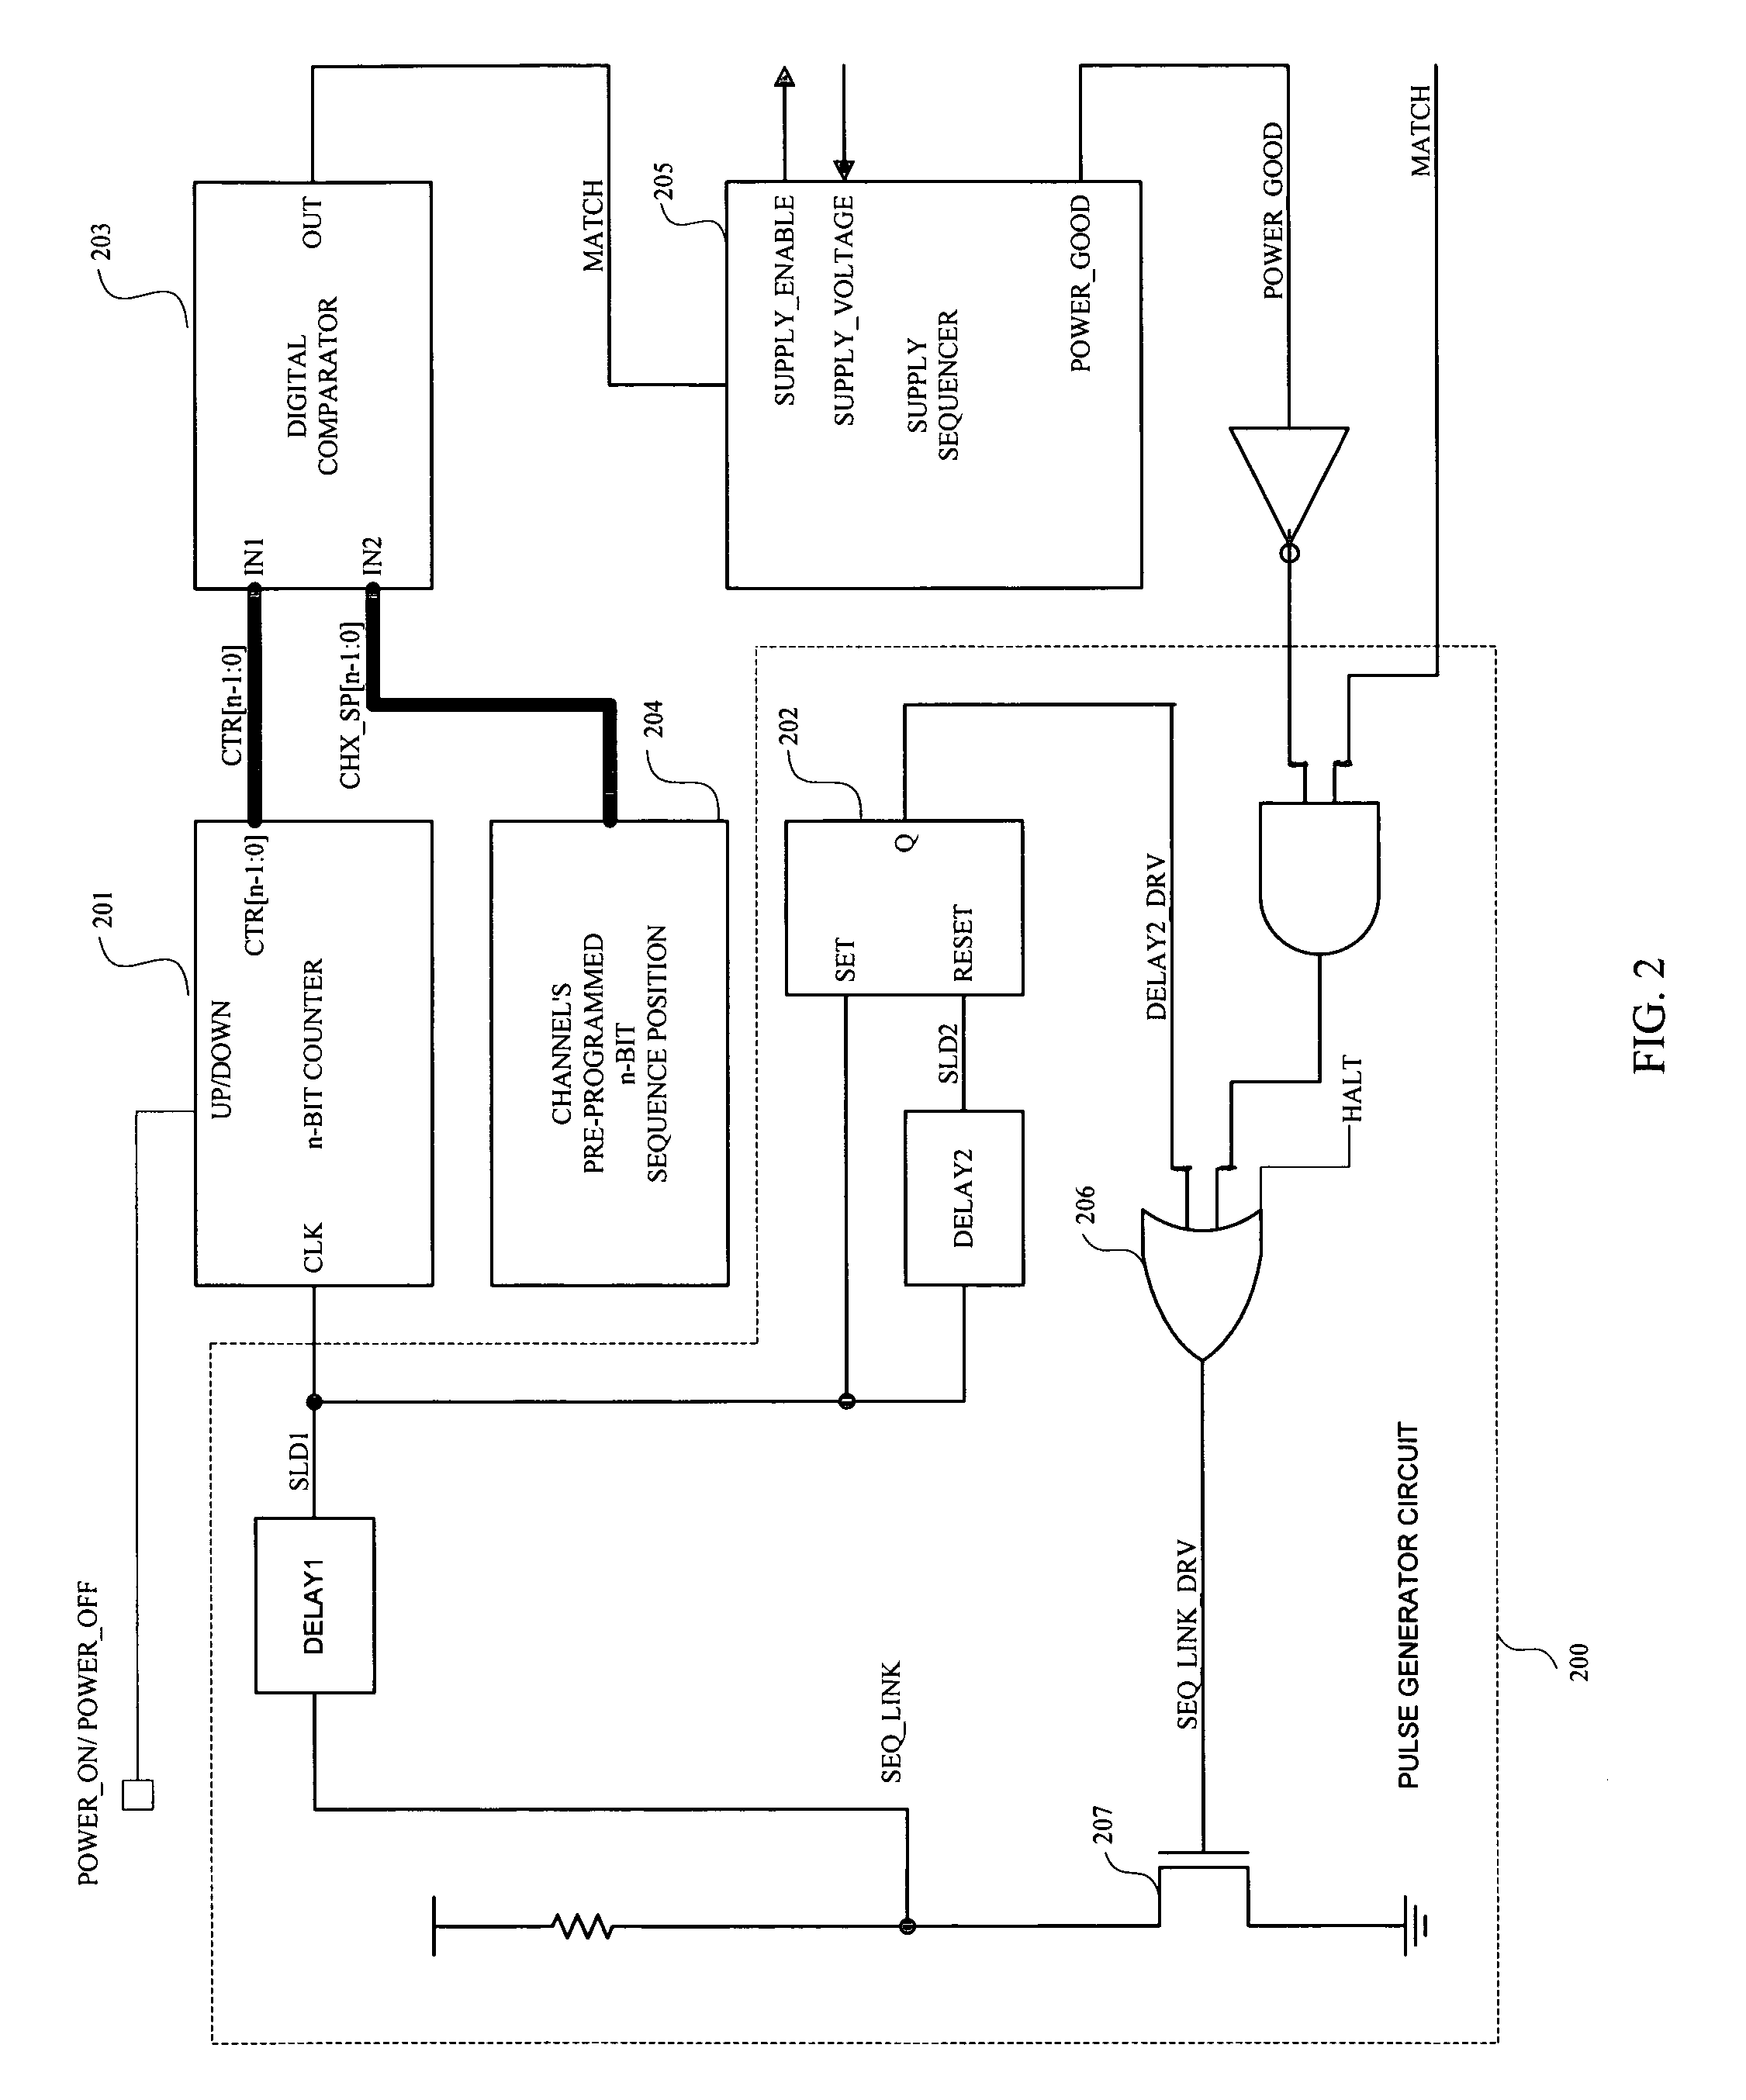 Power supply sequencing distributed among multiple devices with linked operation